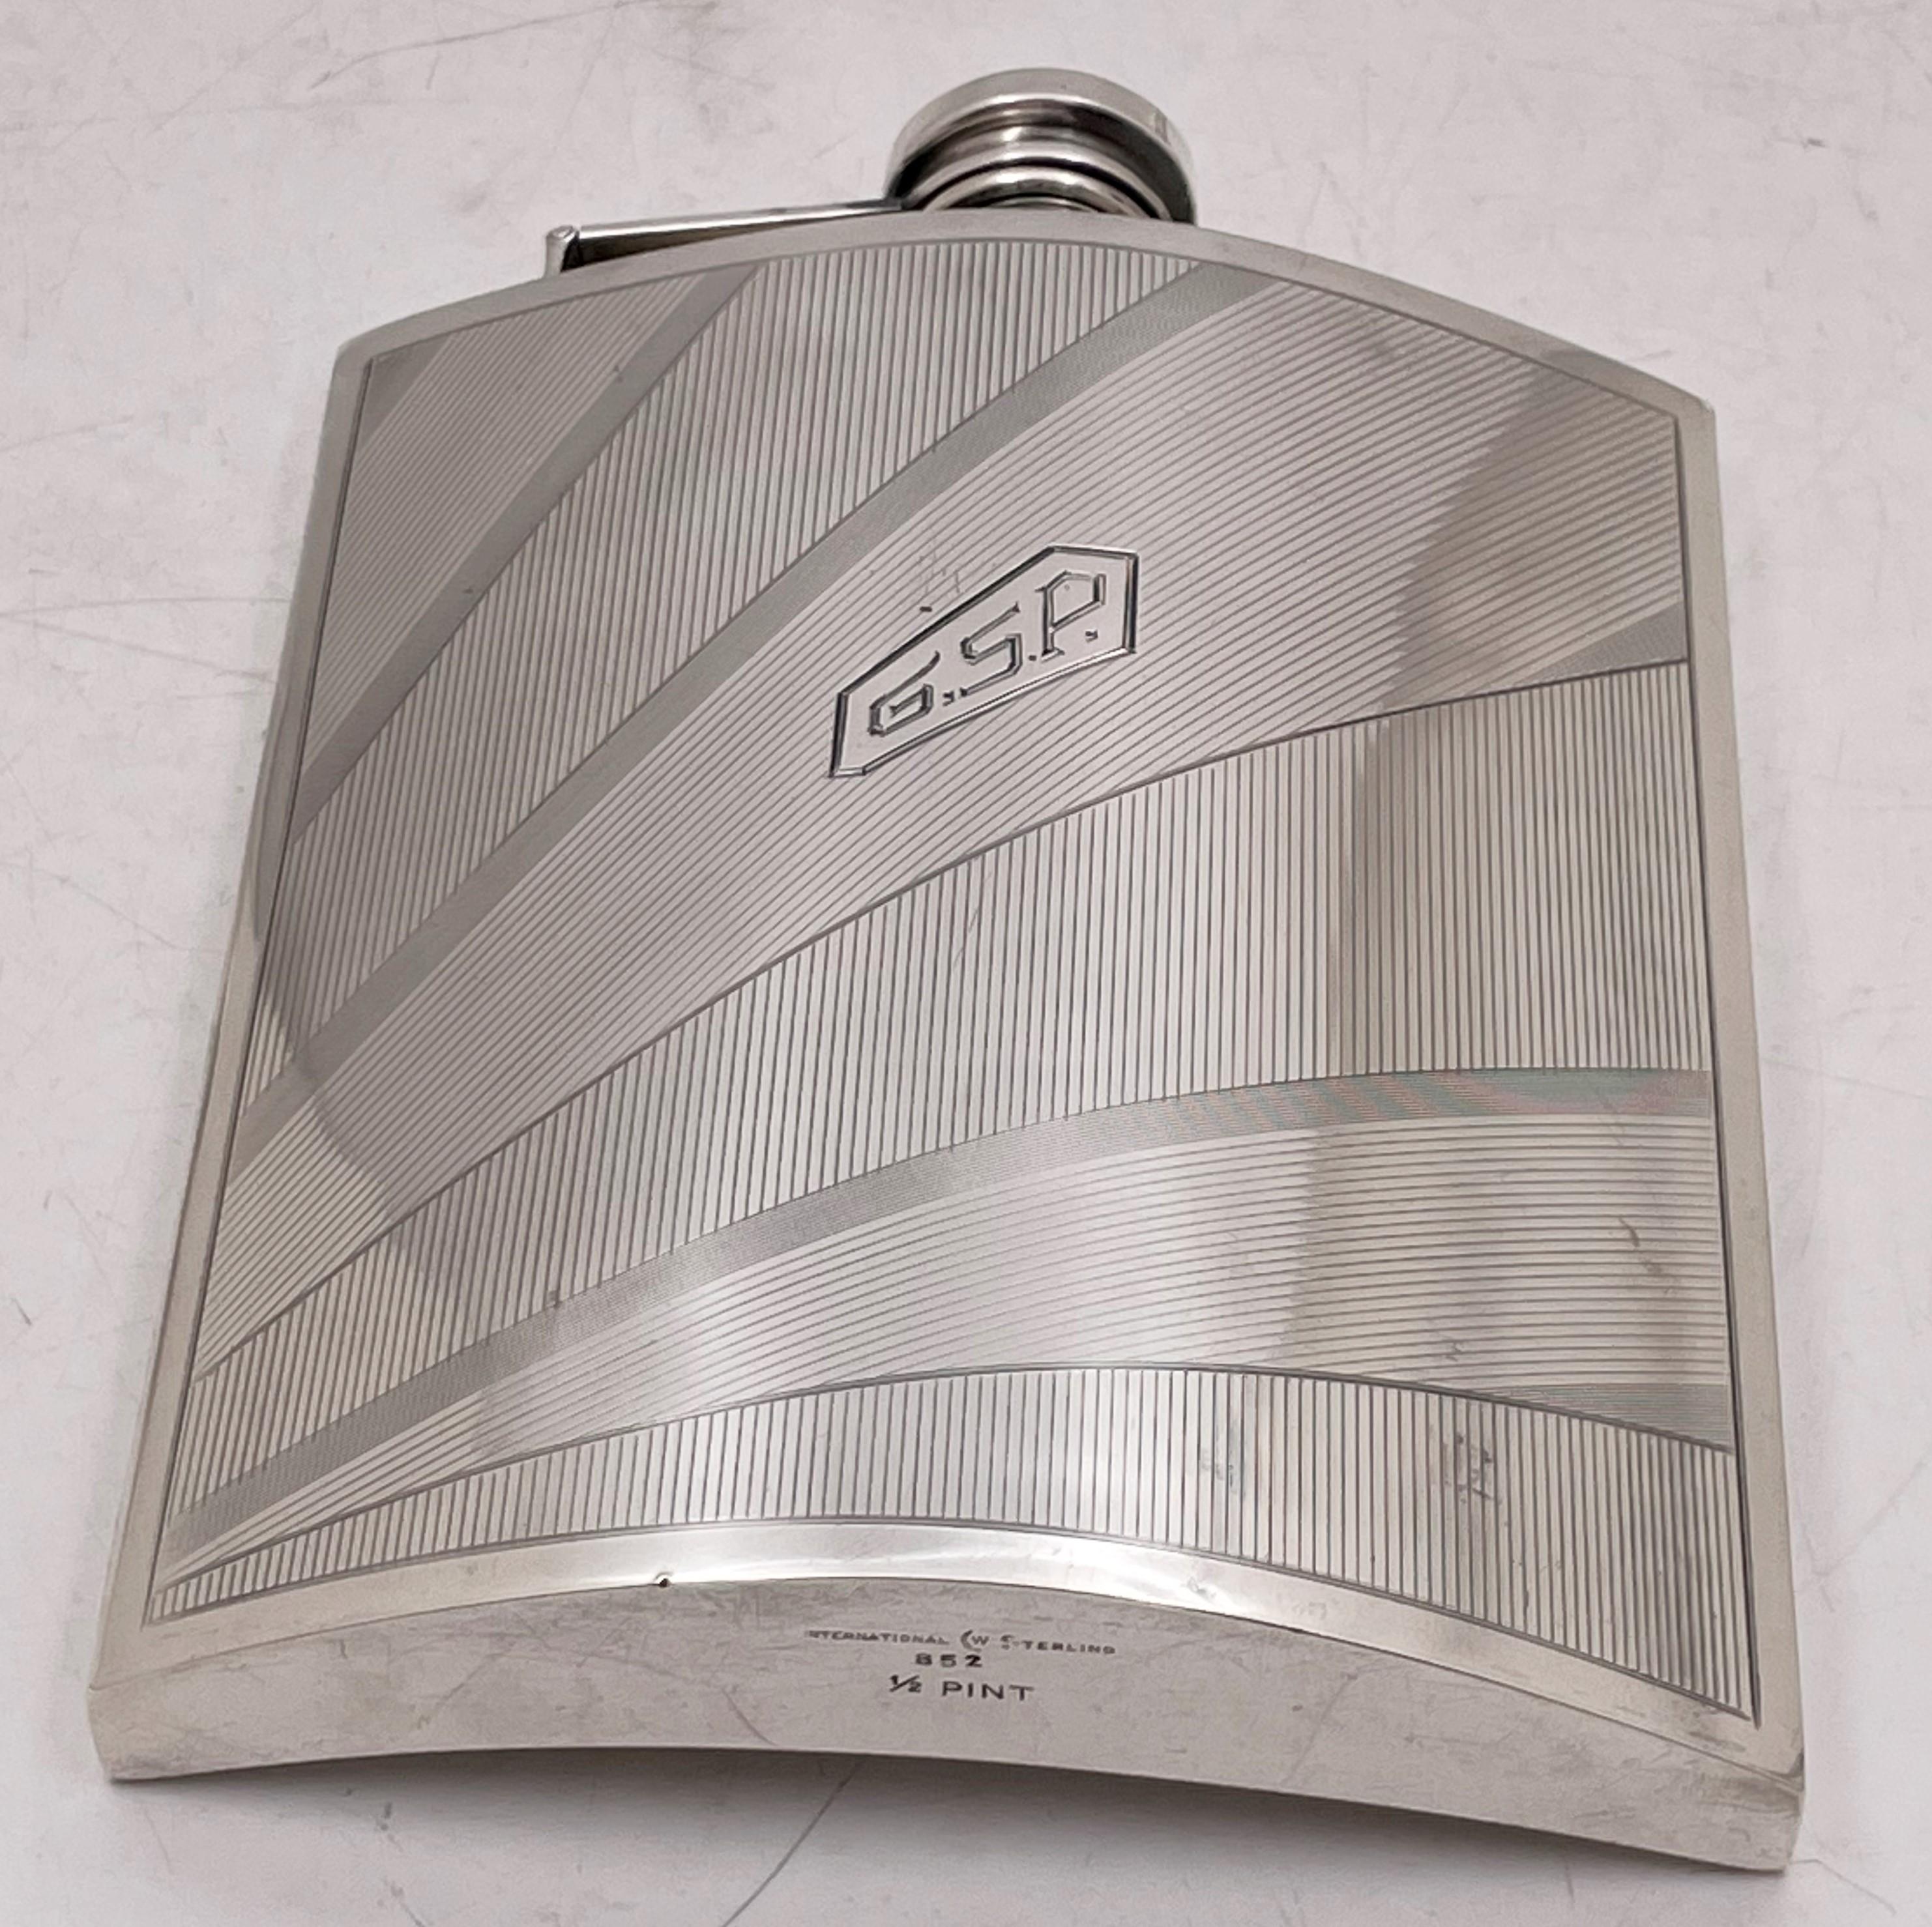 Watrous for International Sterling, sterling silver flask from the early 20th century and in Art Deco style, with an elegant, geometric design. It measures 5 7/8'' in height by 5'' in width by 7/8'' in depth, and bears hallmarks as shown. 

Watrous